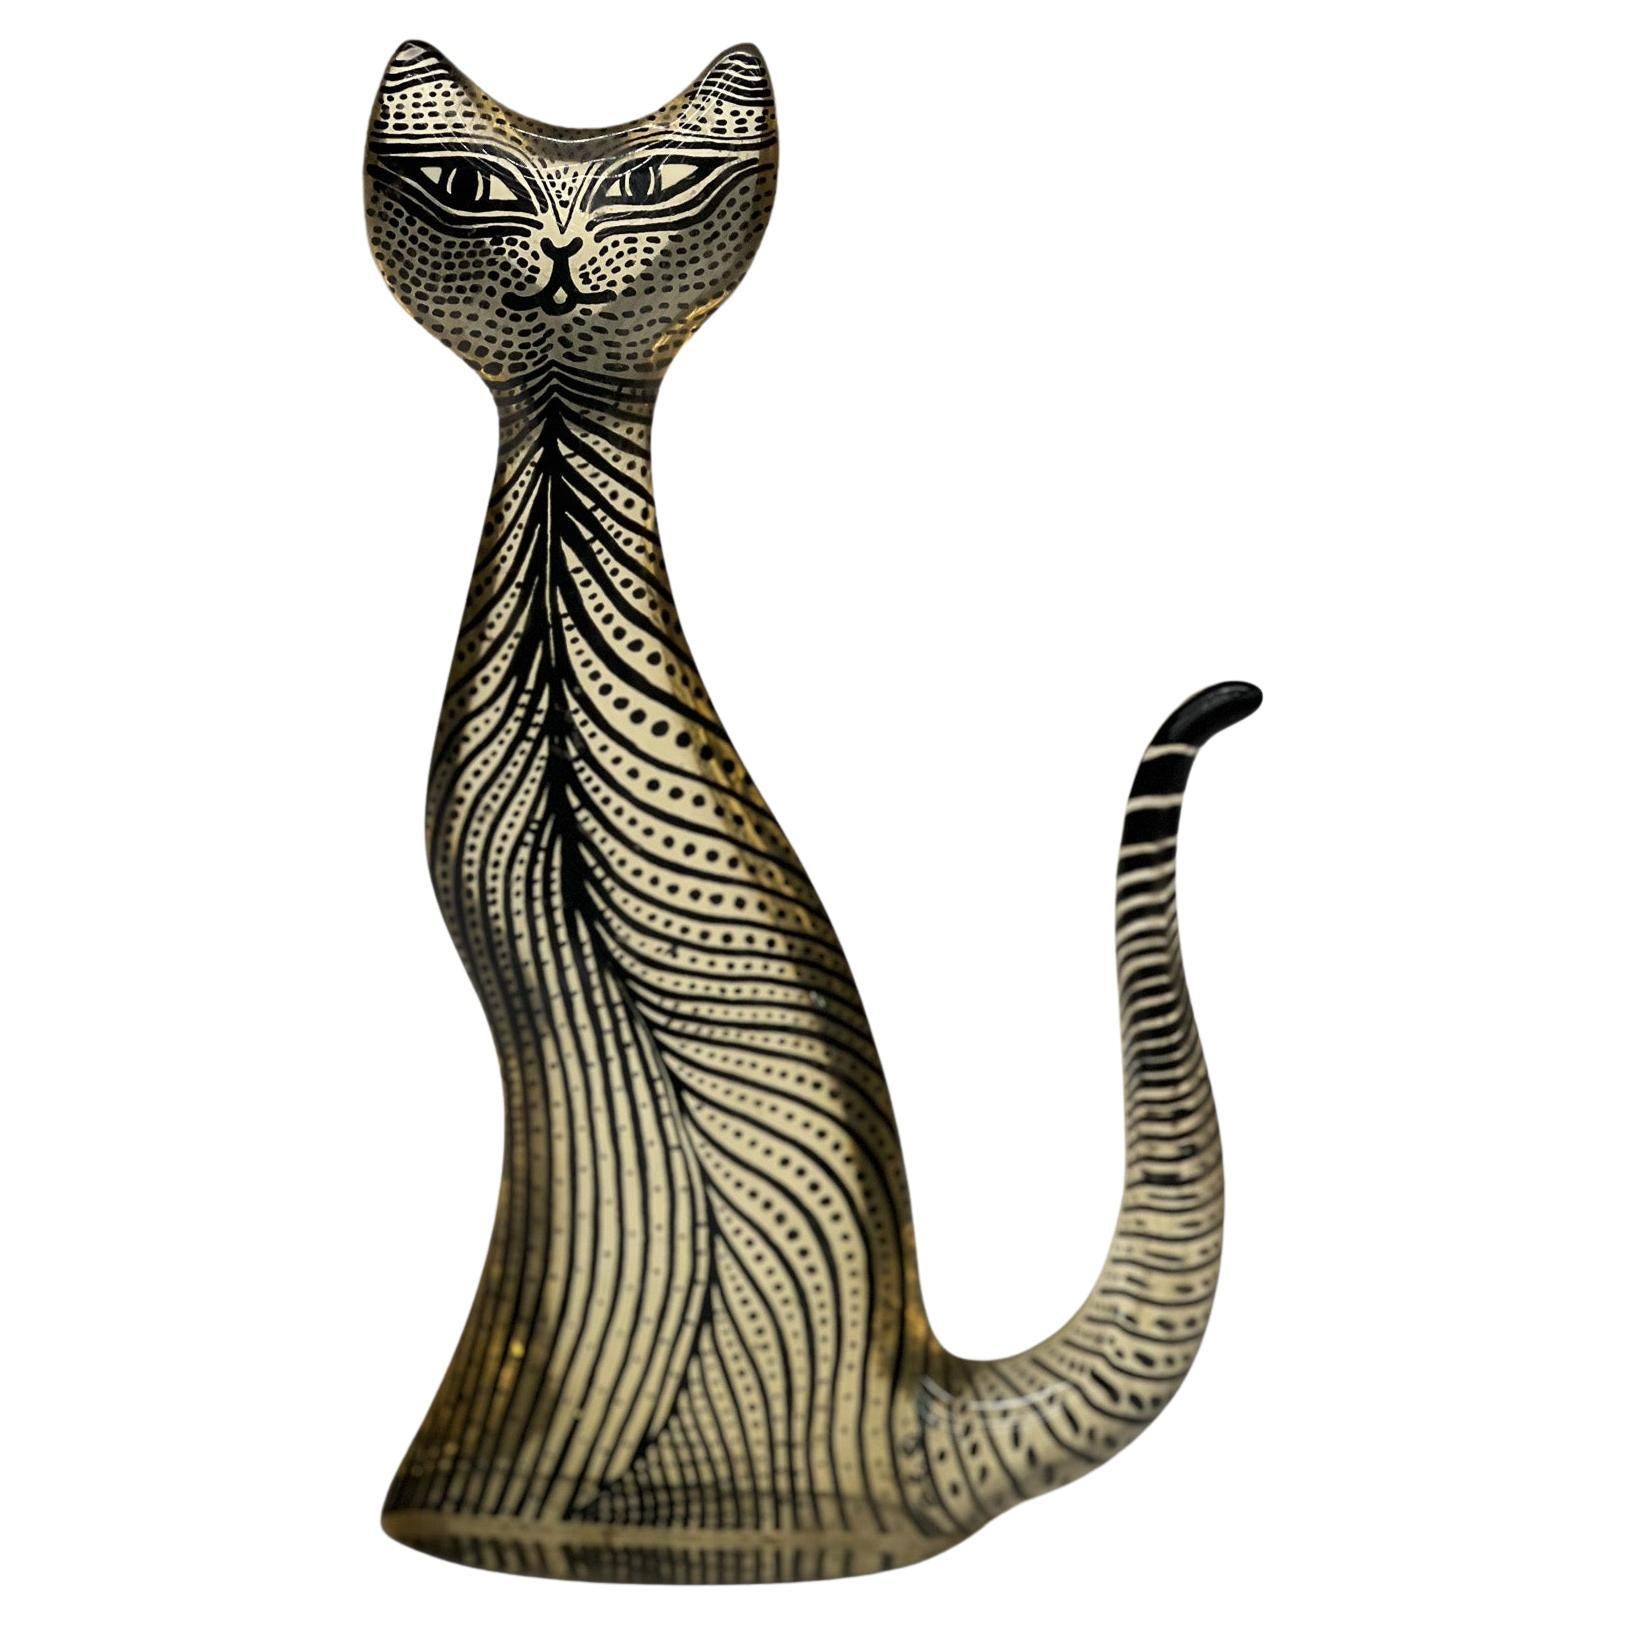 Brazilian Modern Kinetic Sculpture of a Cat in Resin by Abraham Palatinik, 1960s For Sale